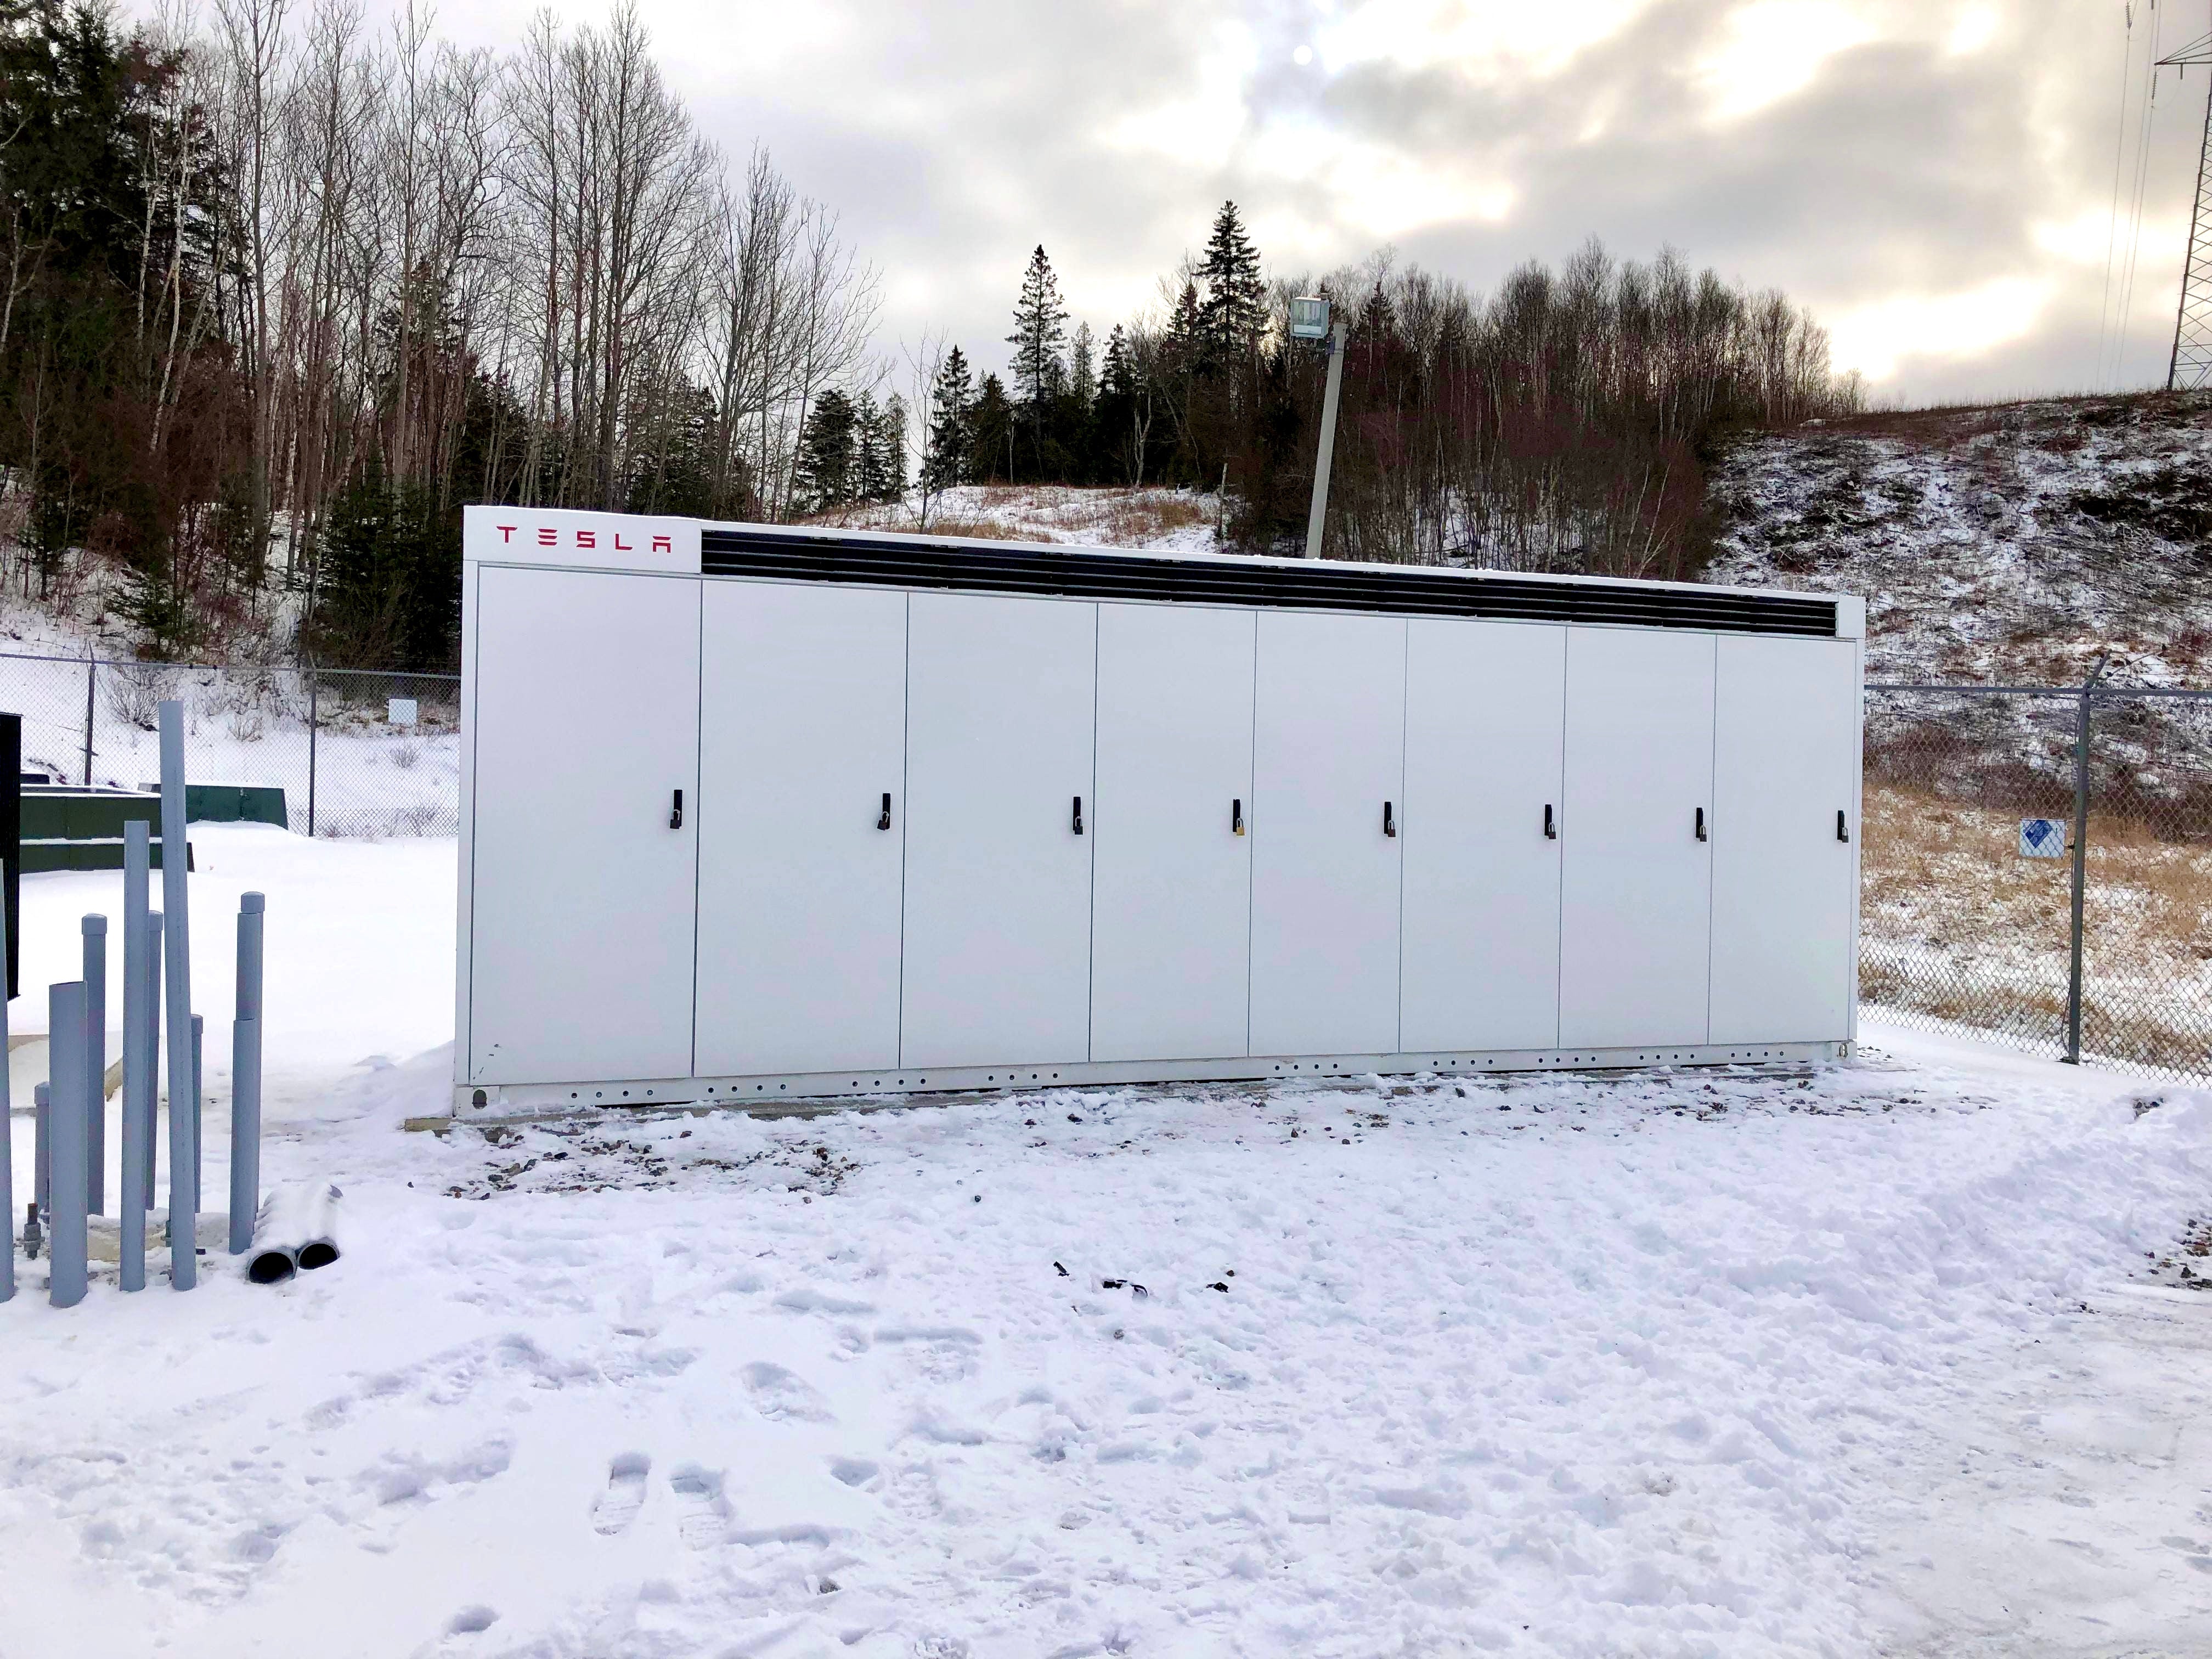 Tesla Megapack Installed In Canada, Small Utility Could Save Up To $200K Per Year